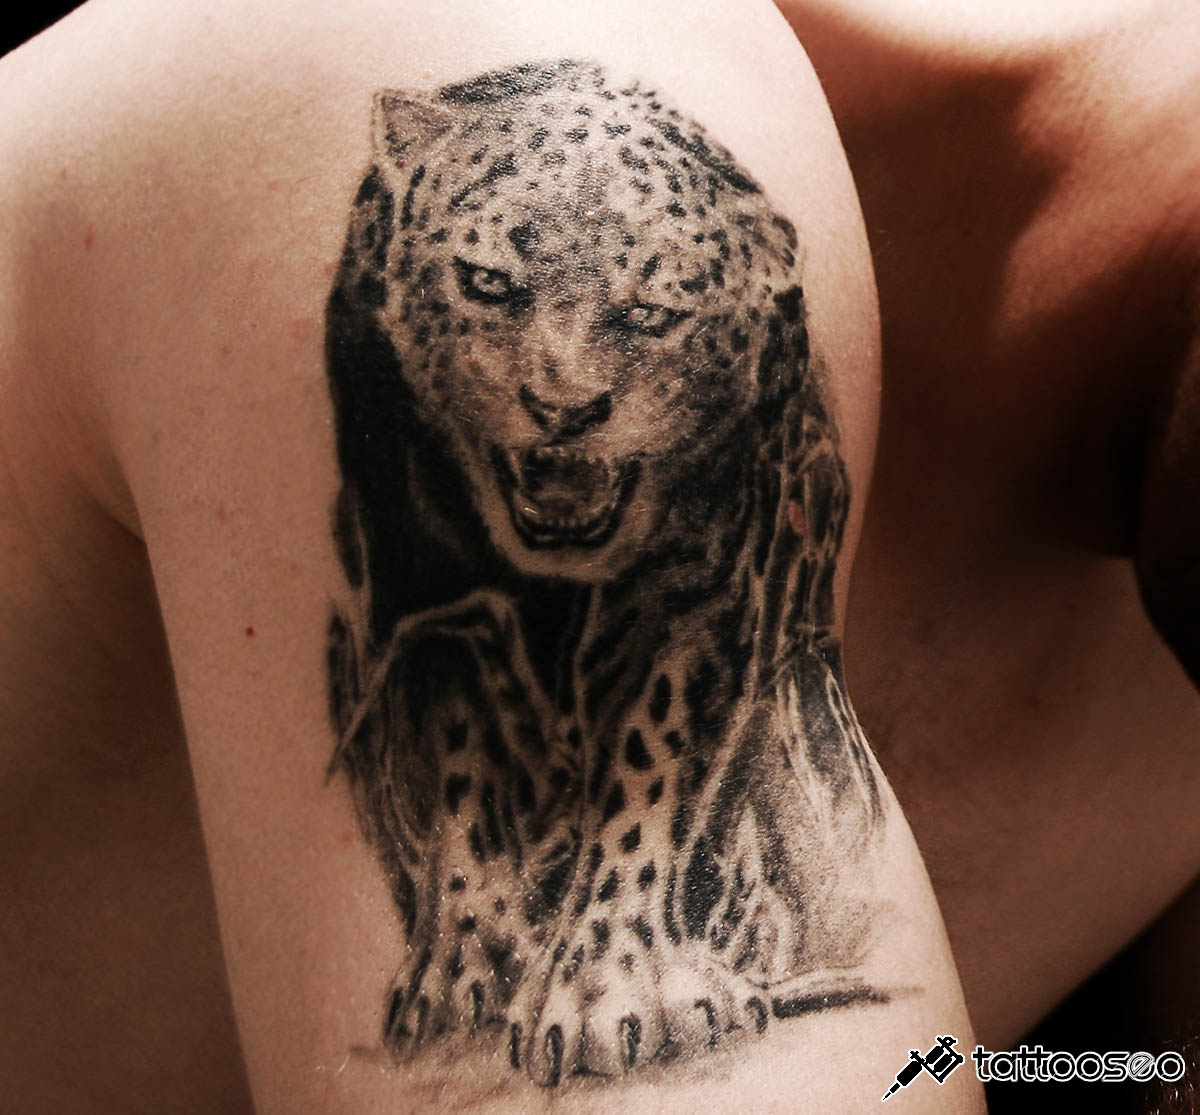 Leopard tattoo meaning